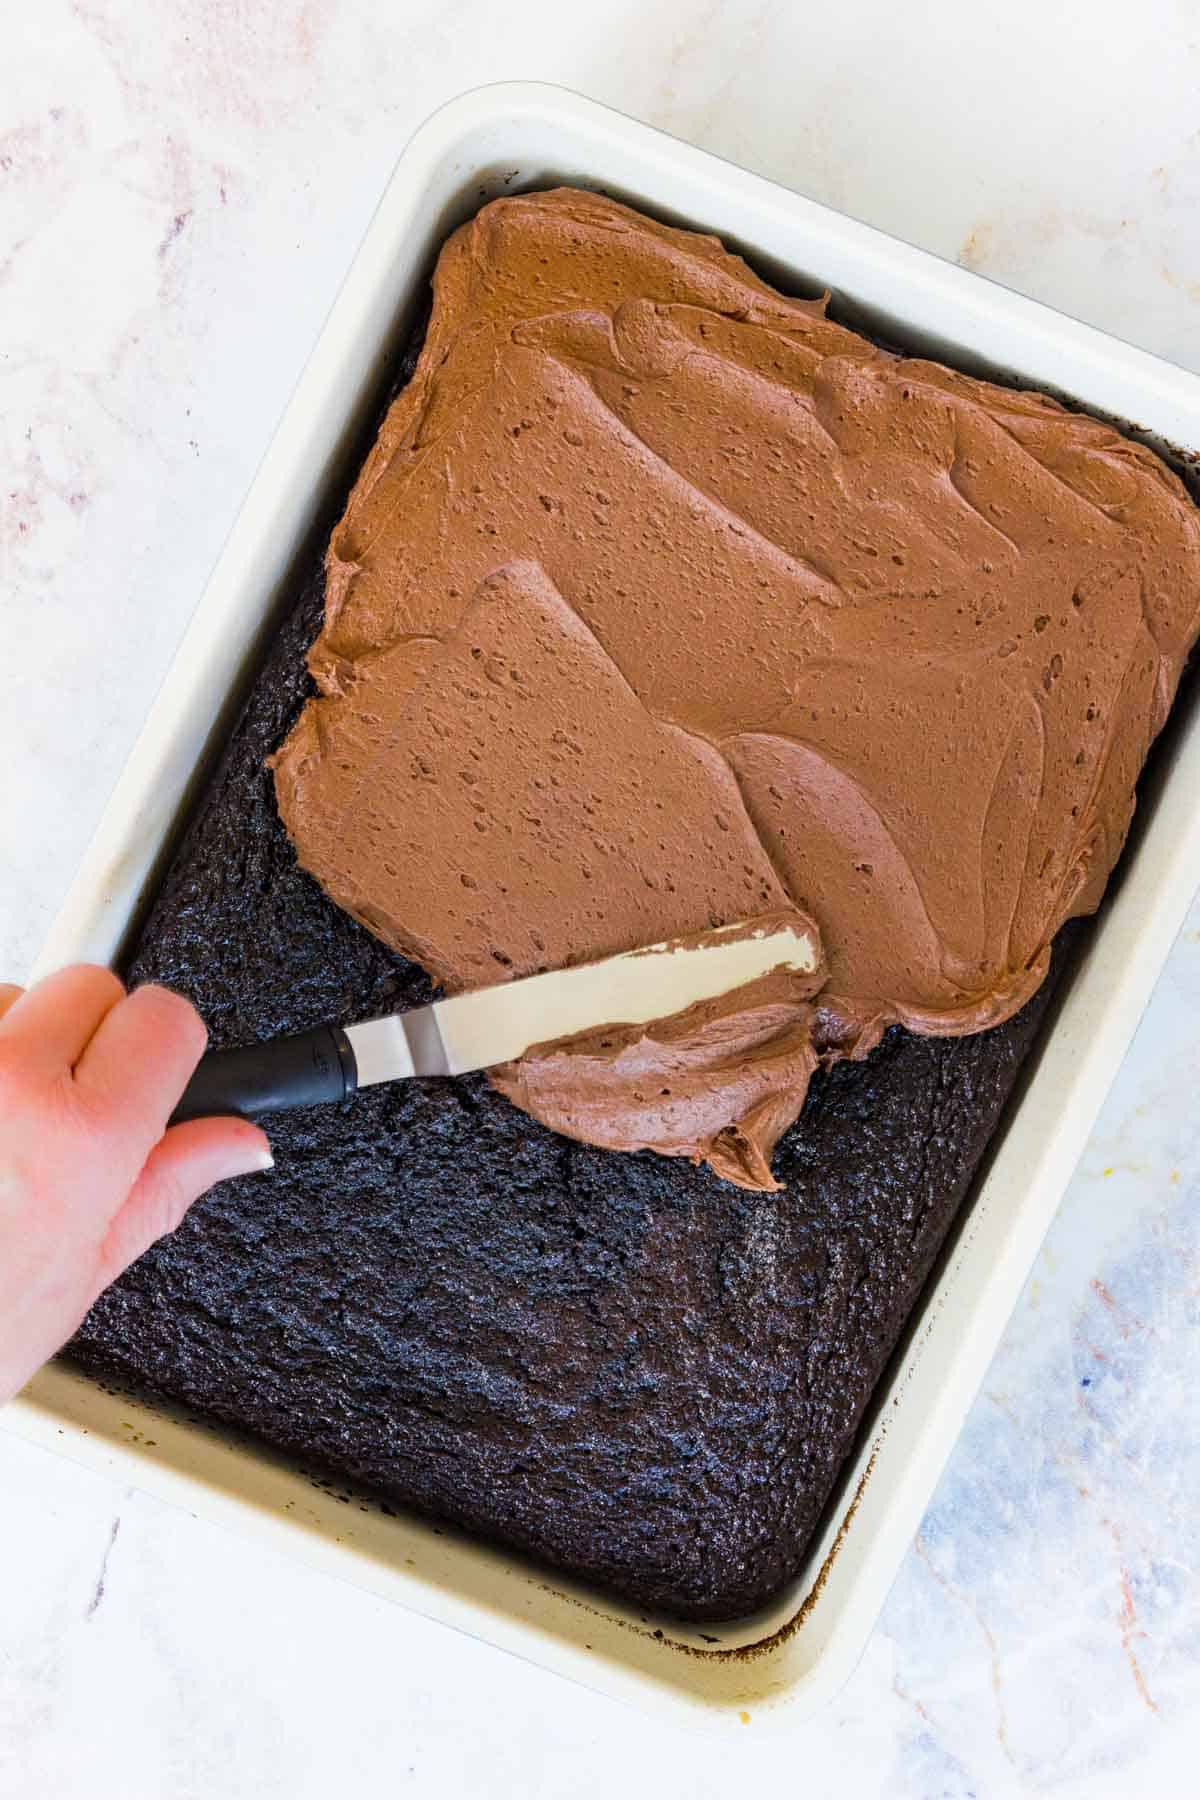 Chocolate frosting is spread over gluten-free chocolate cake in a rectangular baking pan.